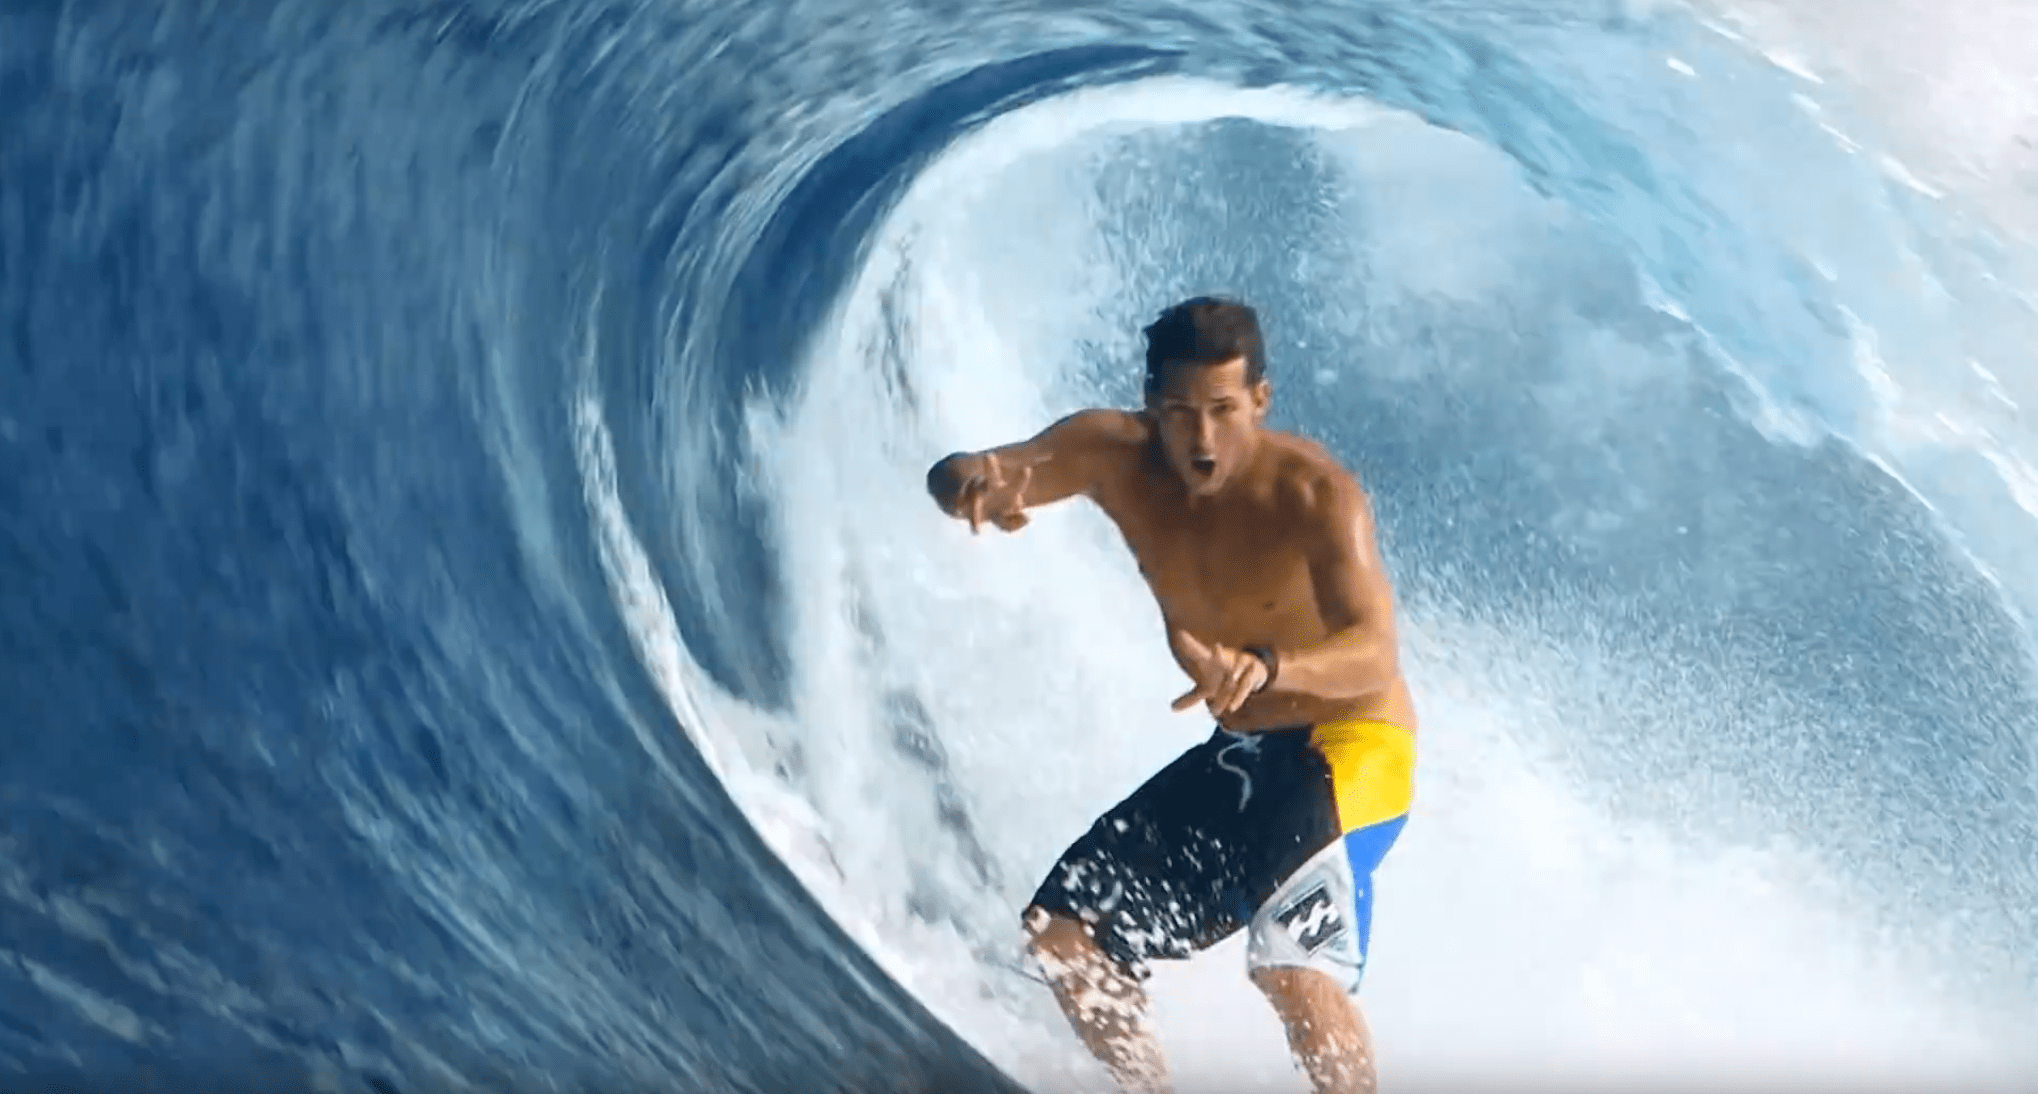 Andy irons, tgr, surf